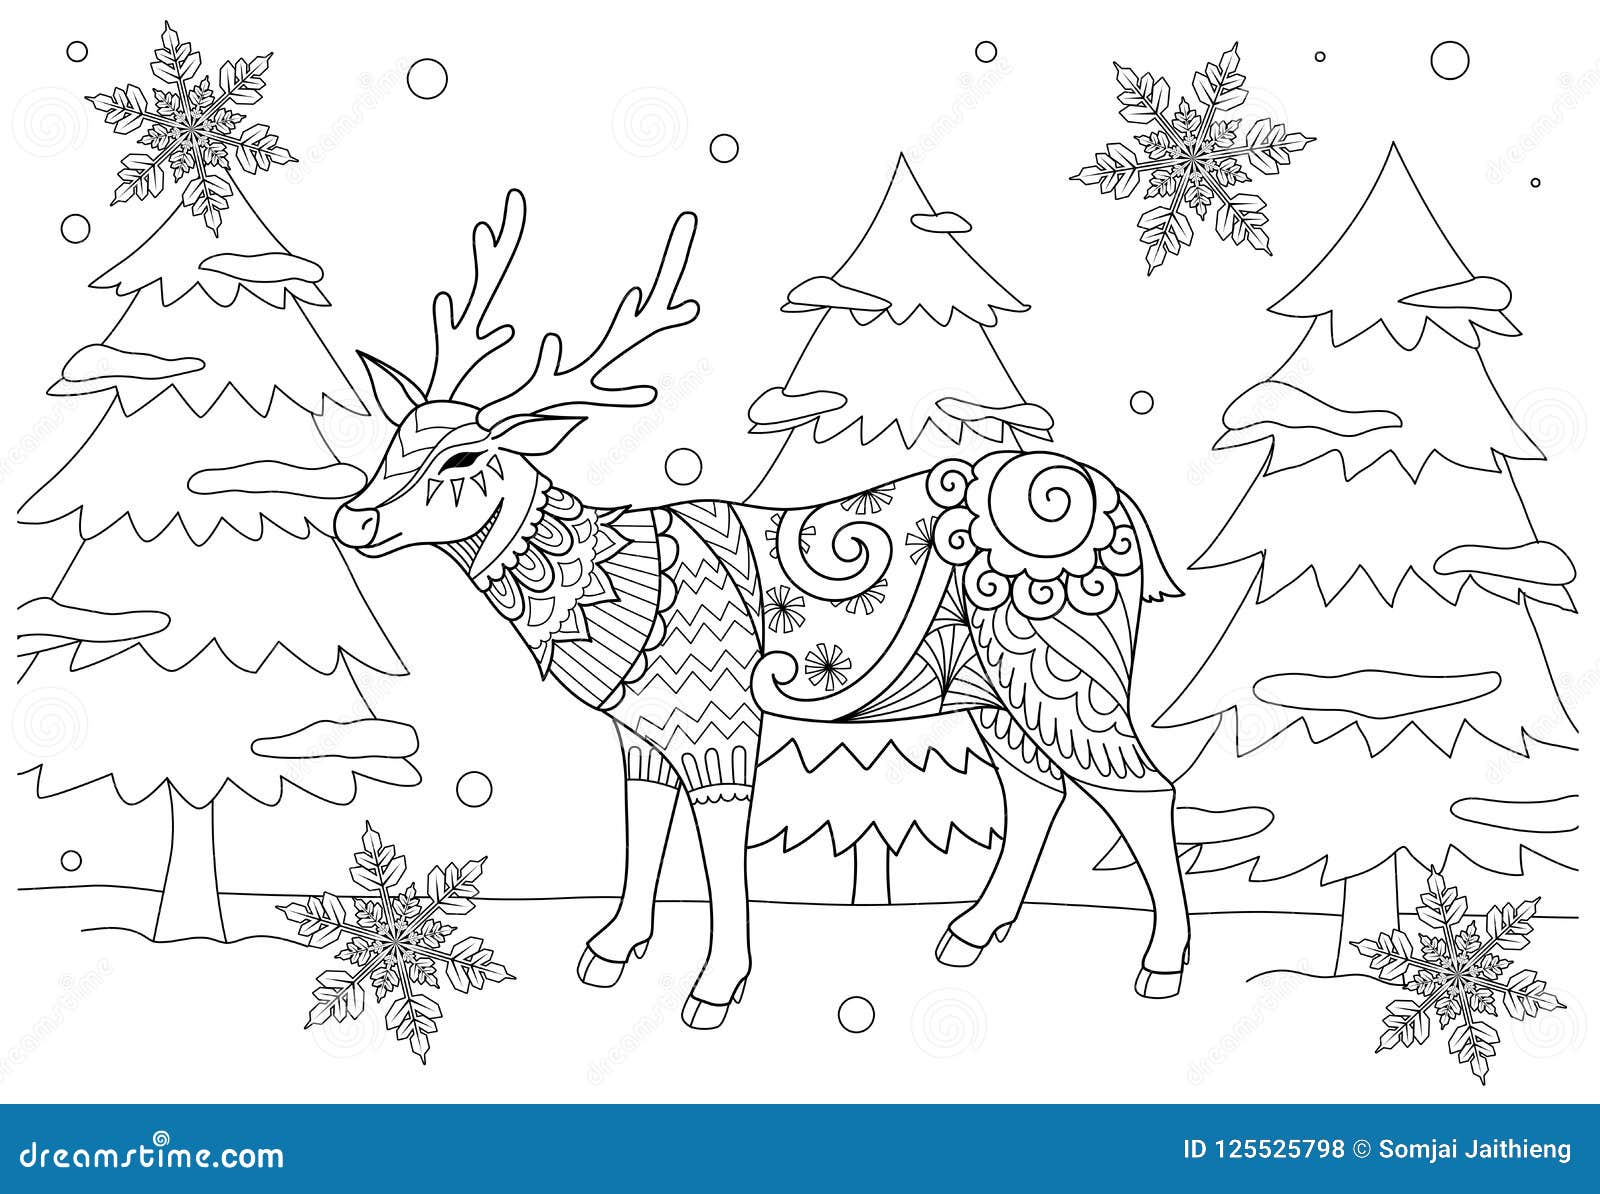 Coloring Book Page For Adult And Kid Colouring Picture Of - 